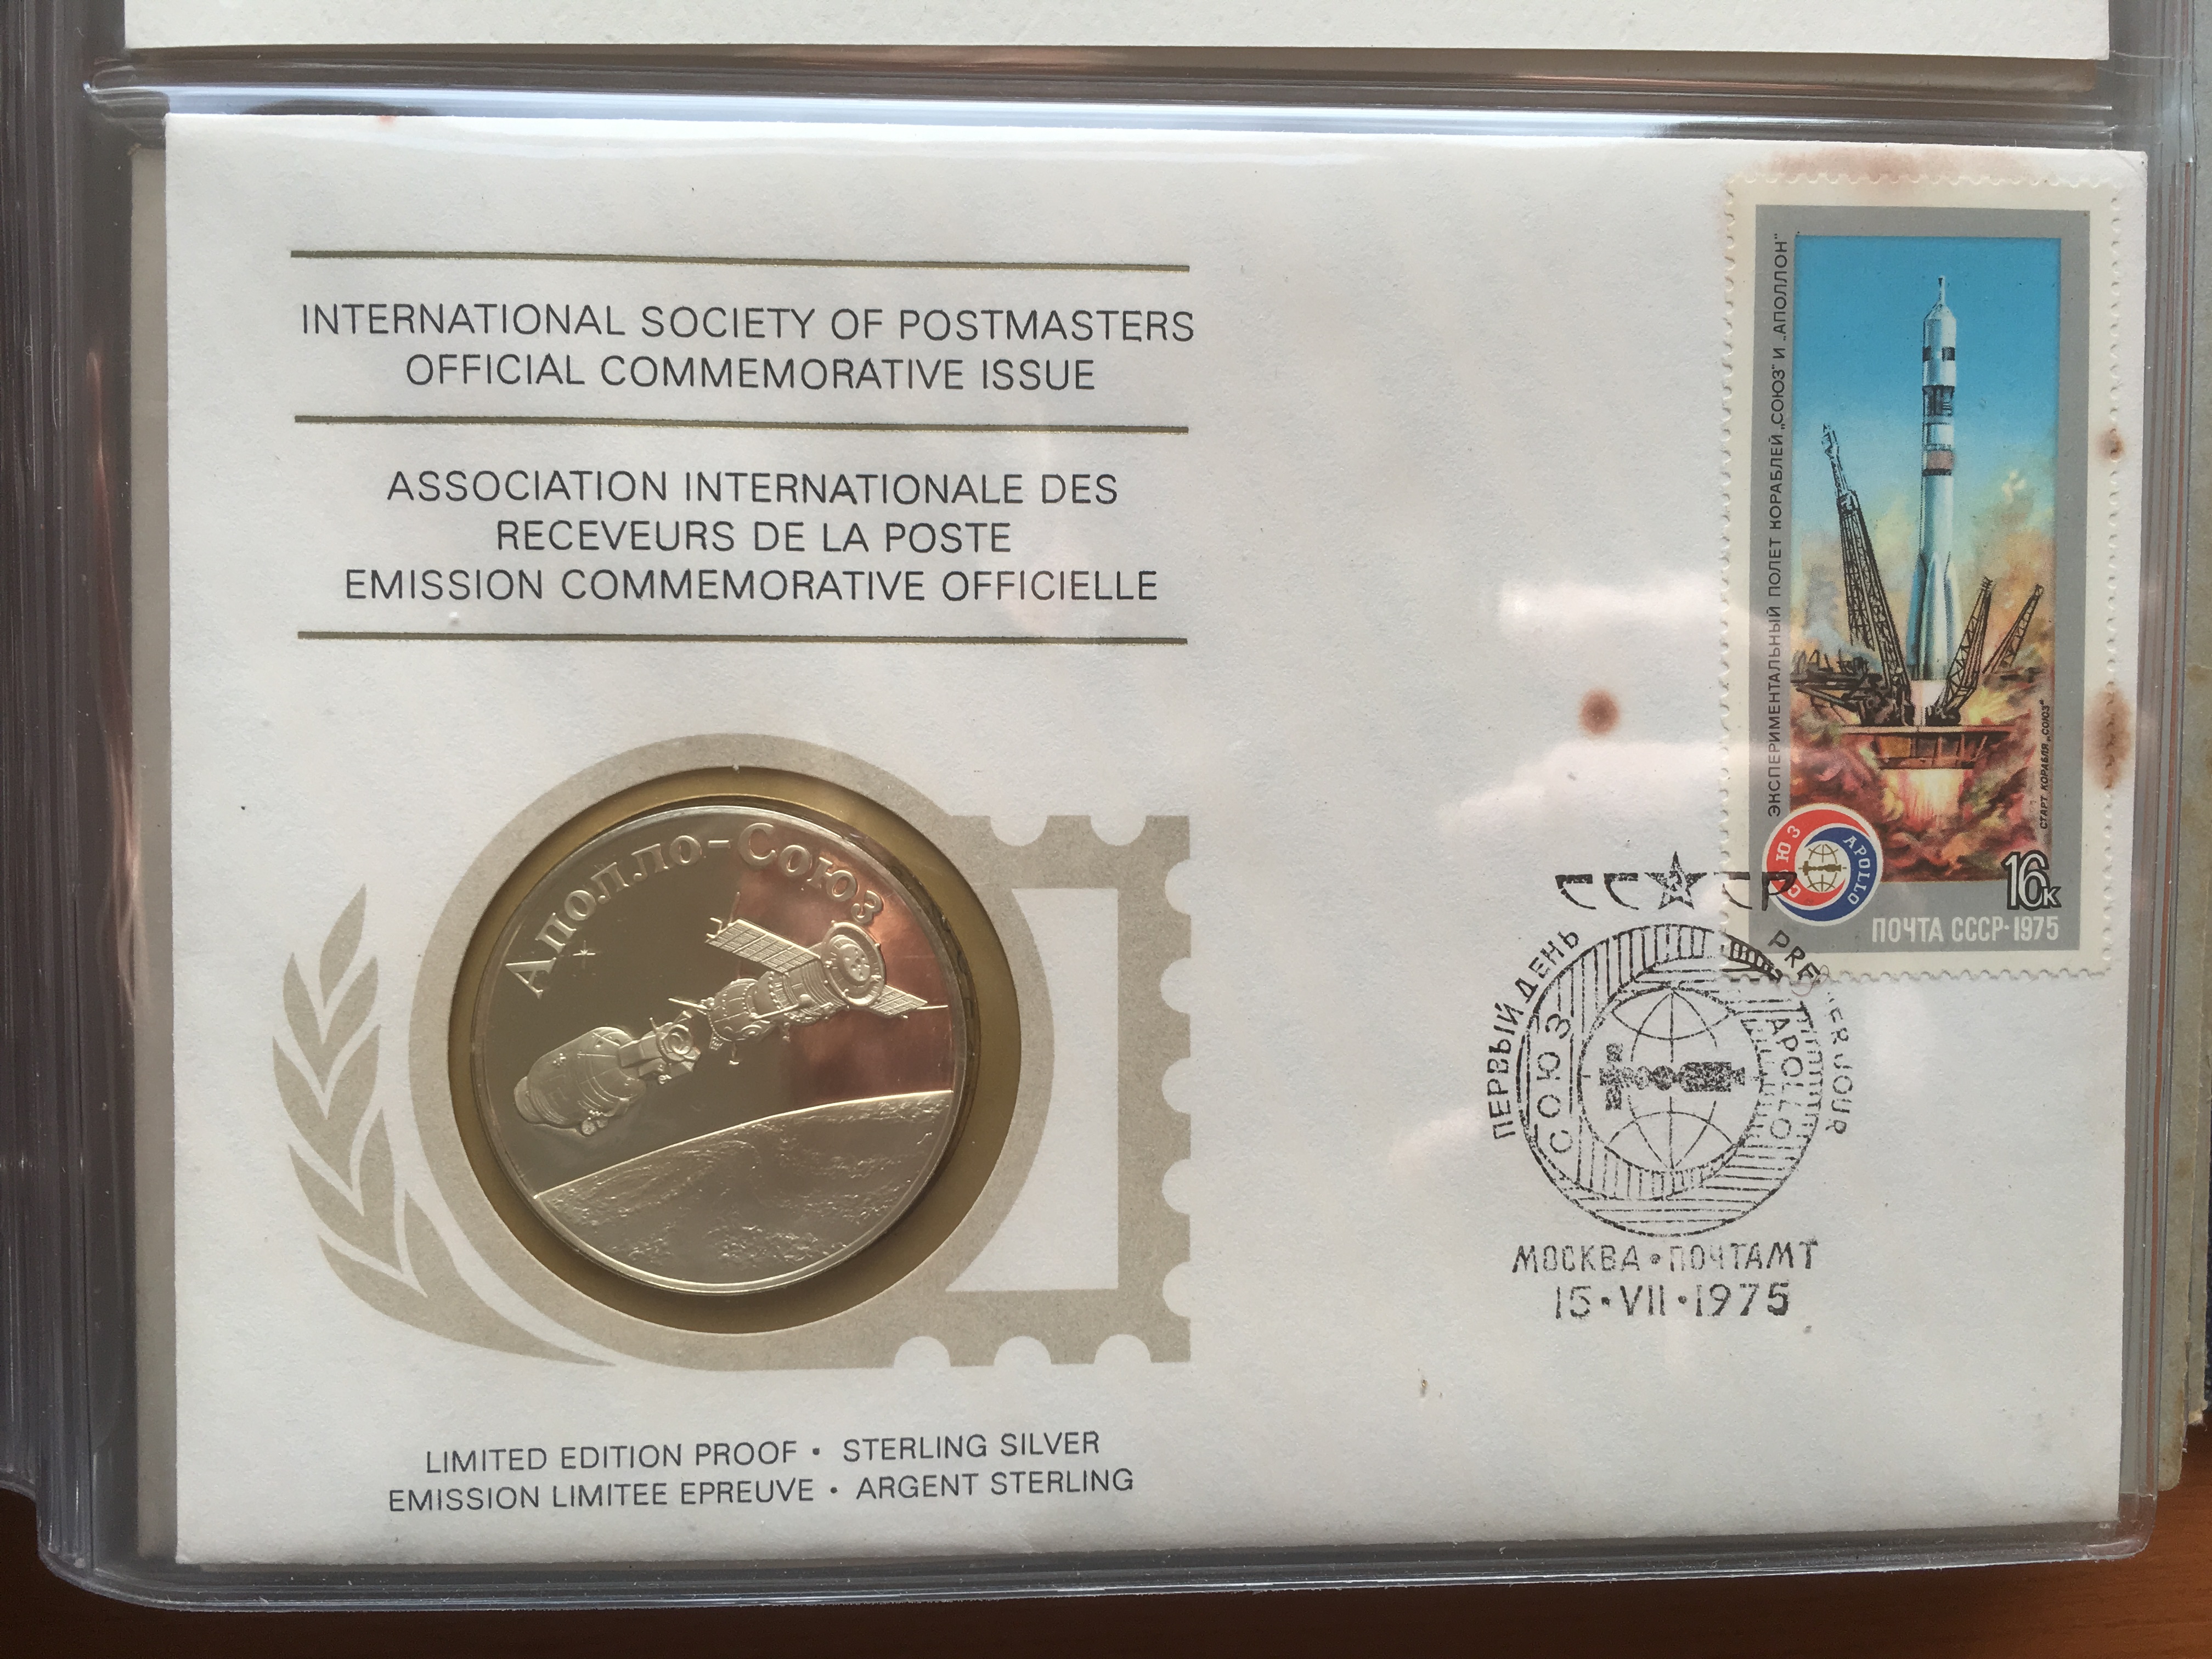 INTERNATIONAL SOCIETY POSTMASTERS 1975 MEDALLIC COVER COLLECTION OF 72 COVERS IN TWO ALBUMS EACH - Image 5 of 6